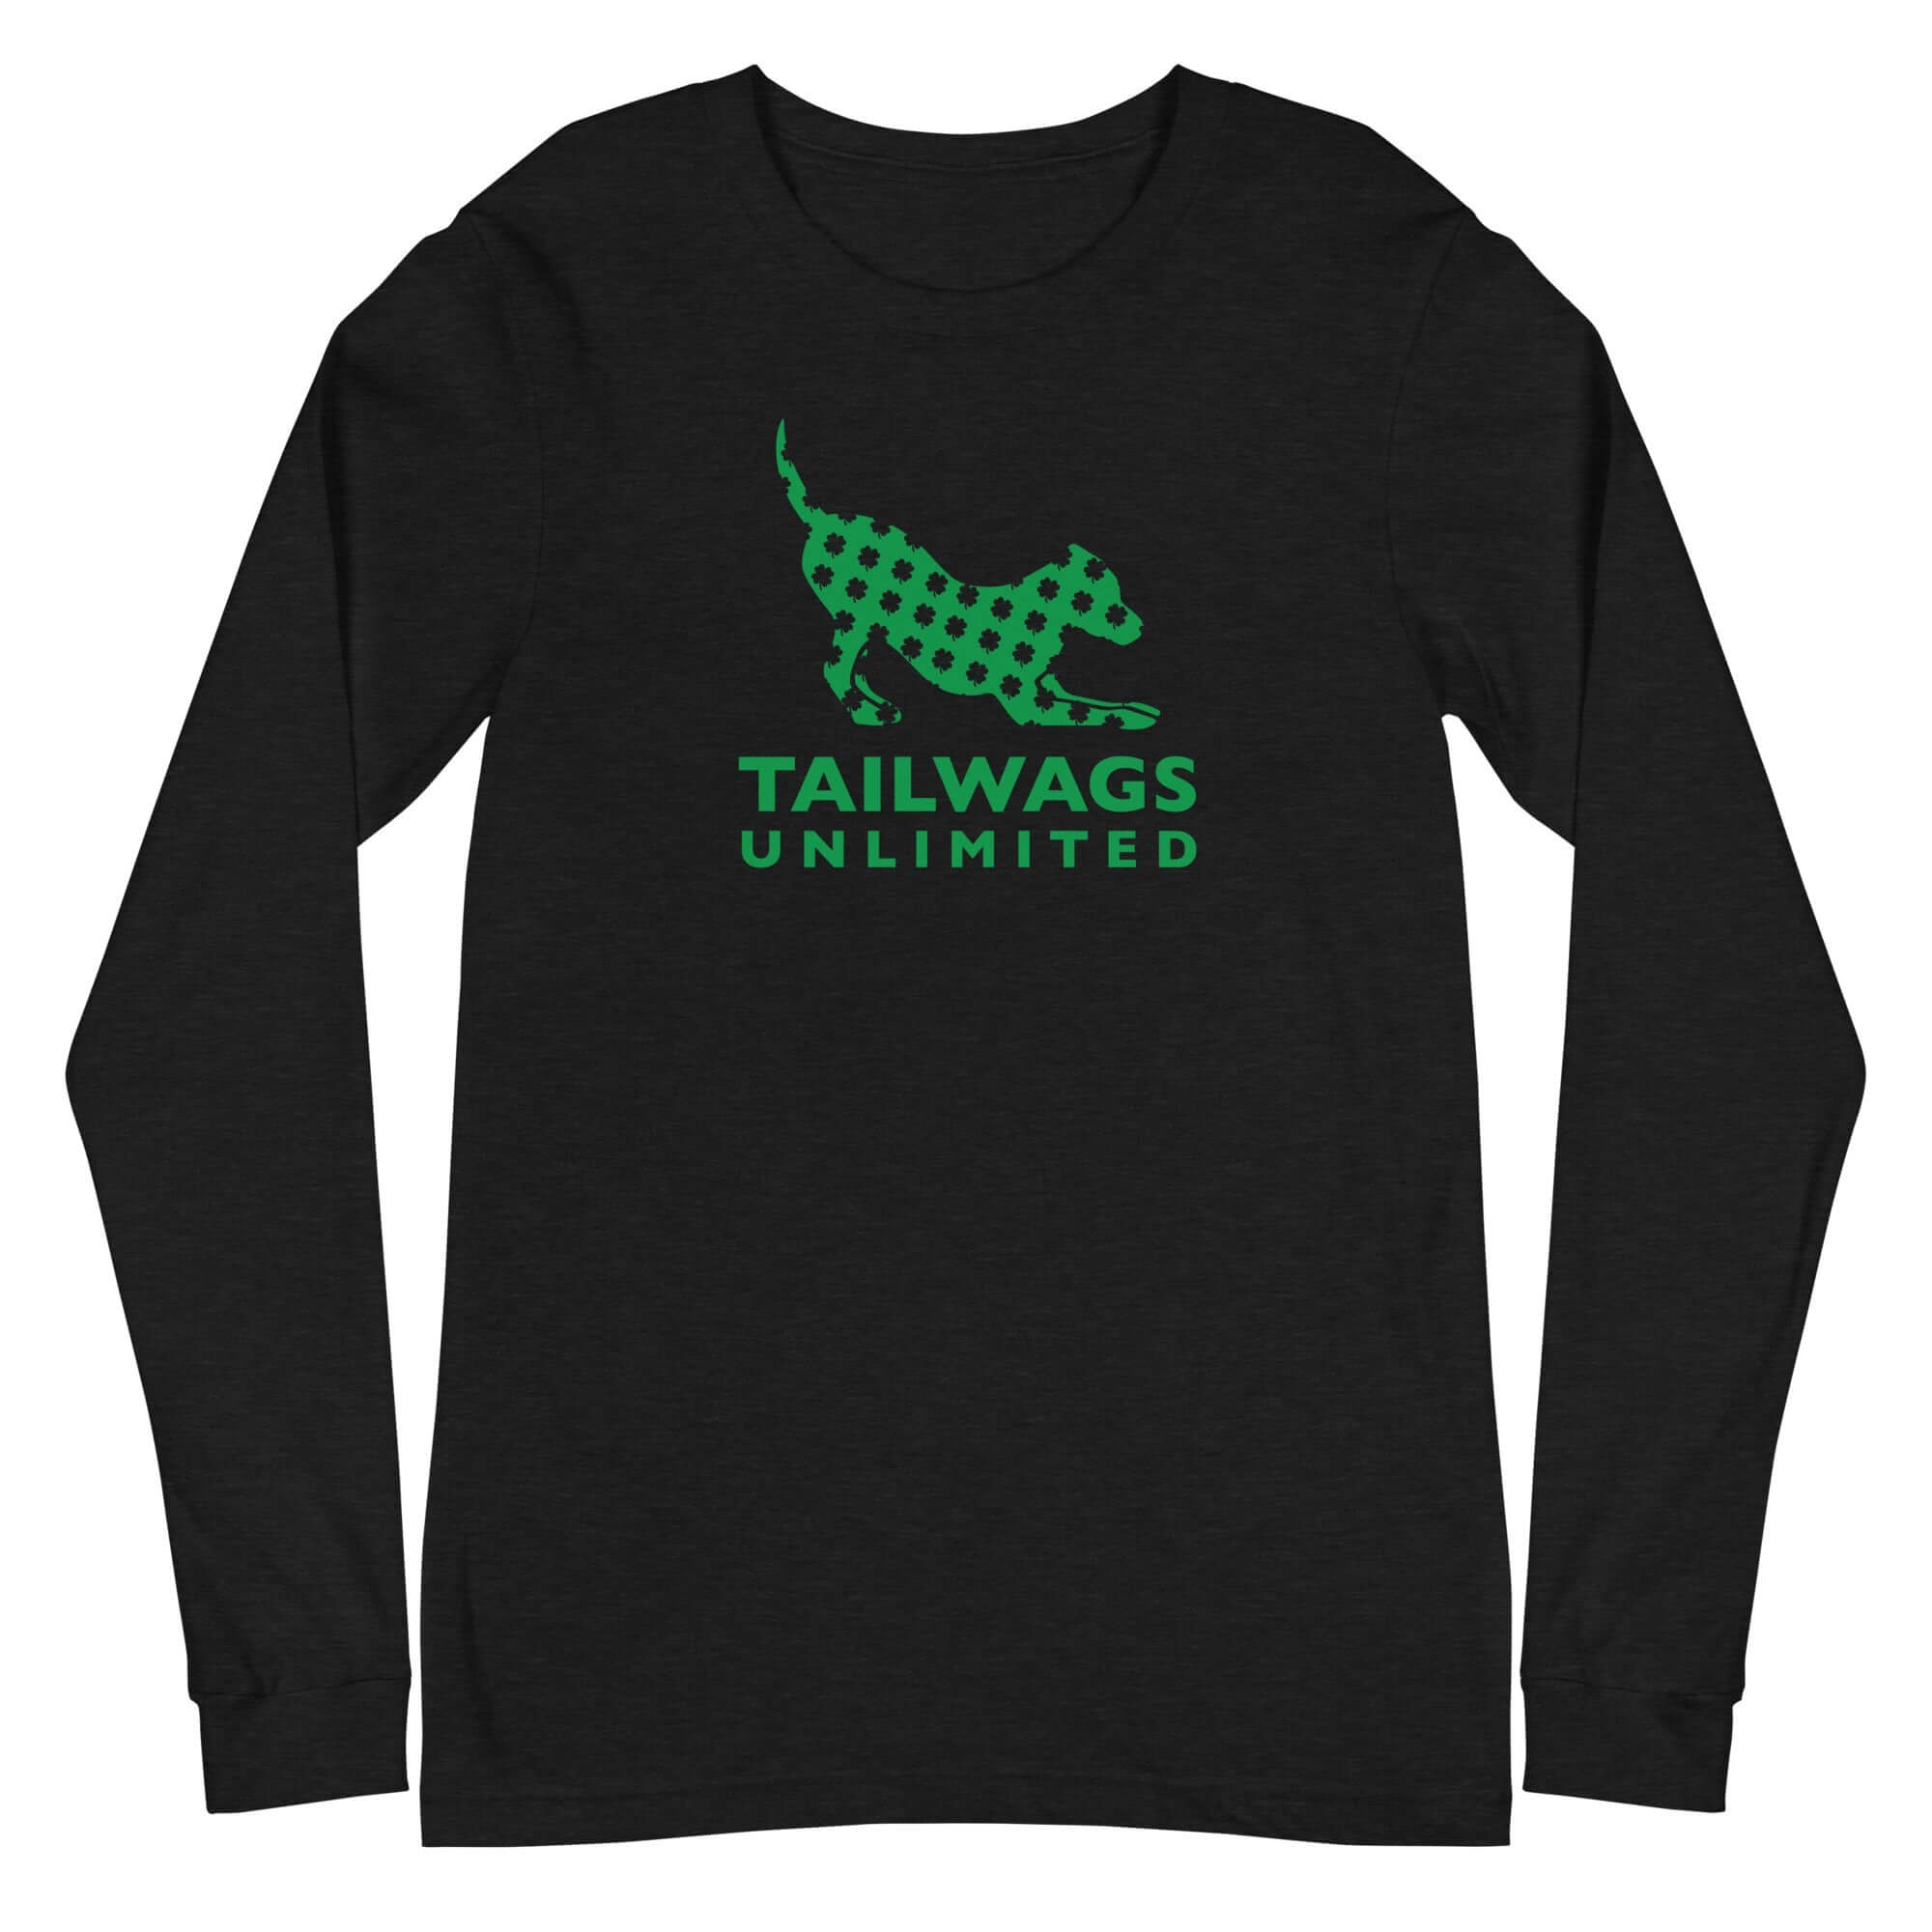 Clover Patterned Green Logo Long Sleeve Tee - TAILWAGS UNLIMITED